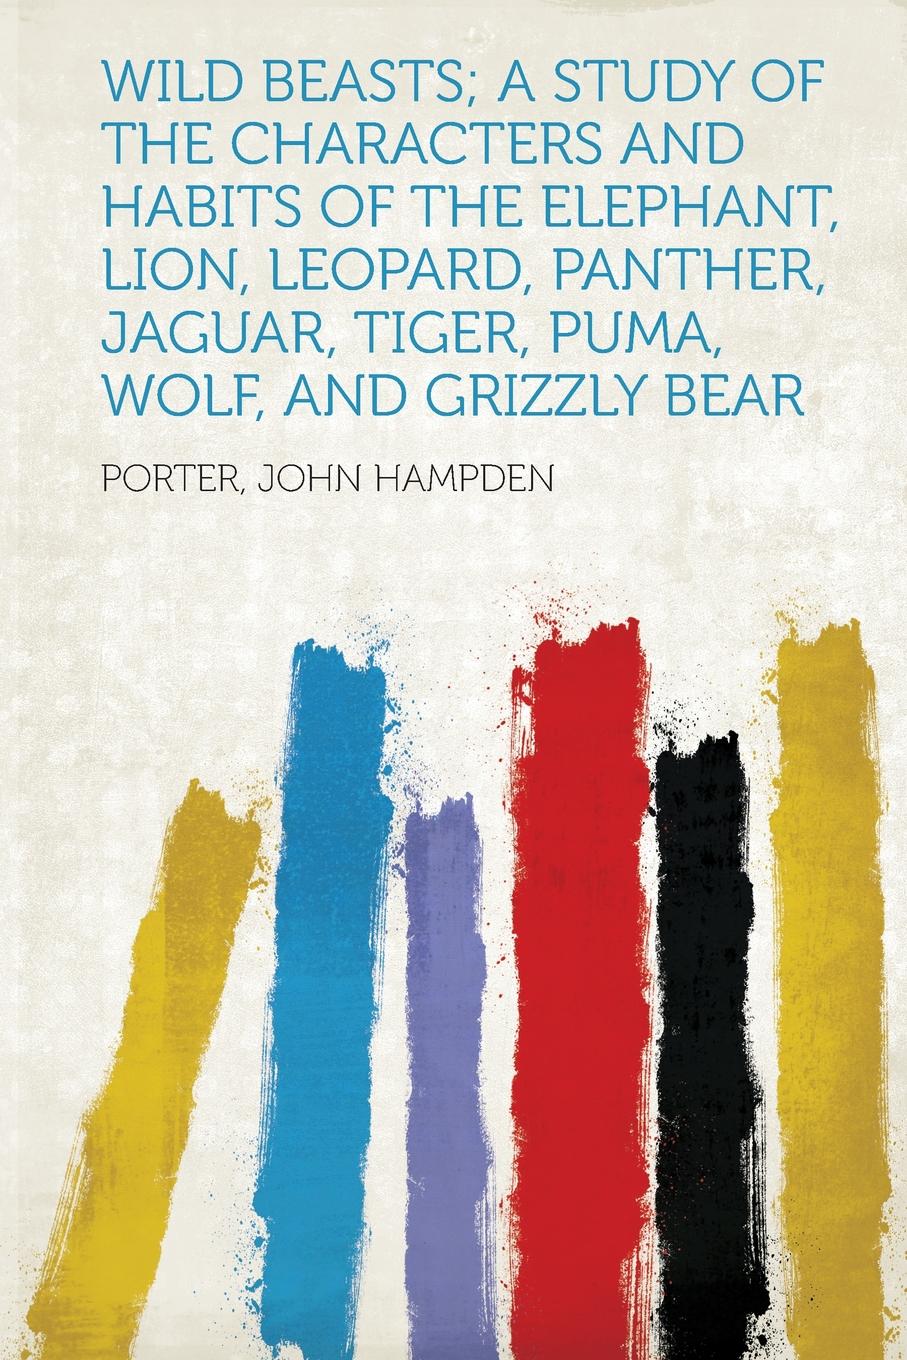 Wild Beasts; a Study of the Characters and Habits of the Elephant, Lion, Leopard, Panther, Jaguar, Tiger, Puma, Wolf, and Grizzly Bear